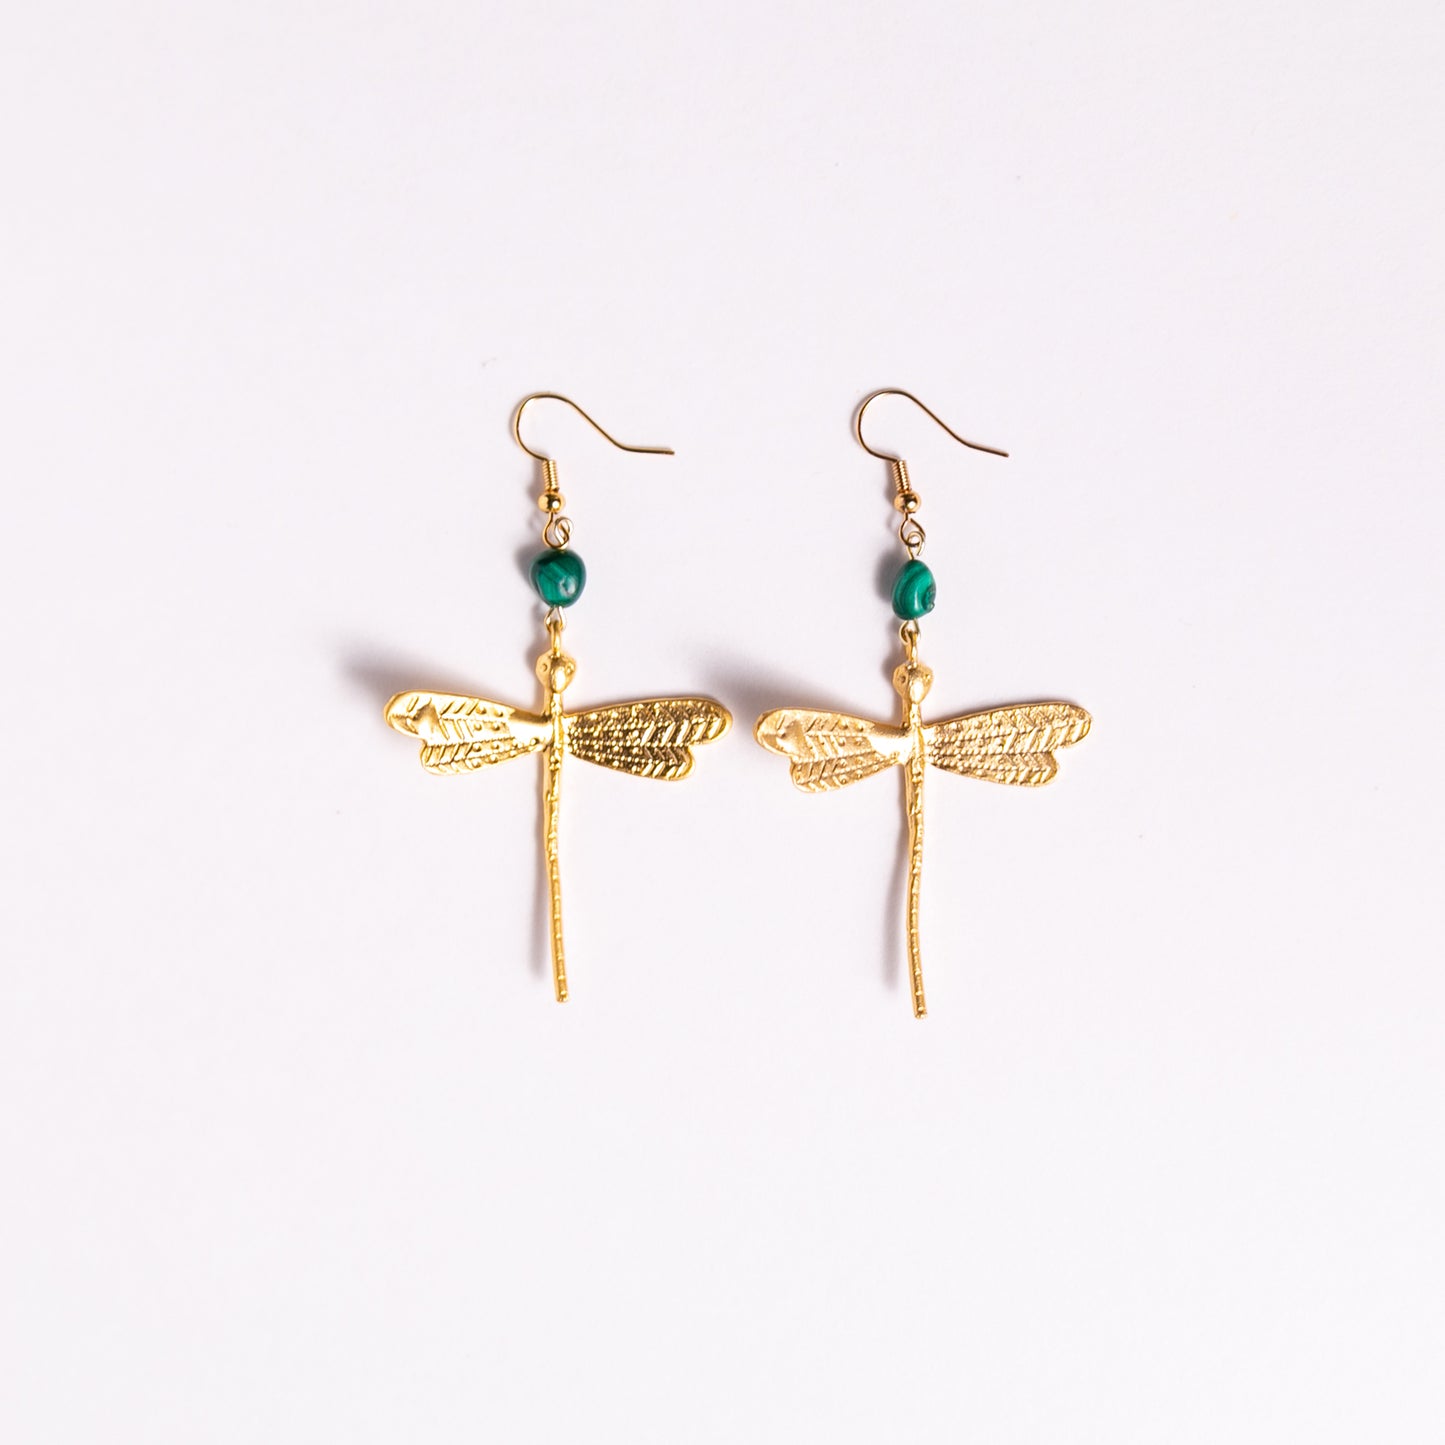 Art Nouveau Inspired Dragonfly Earrings with Malachite